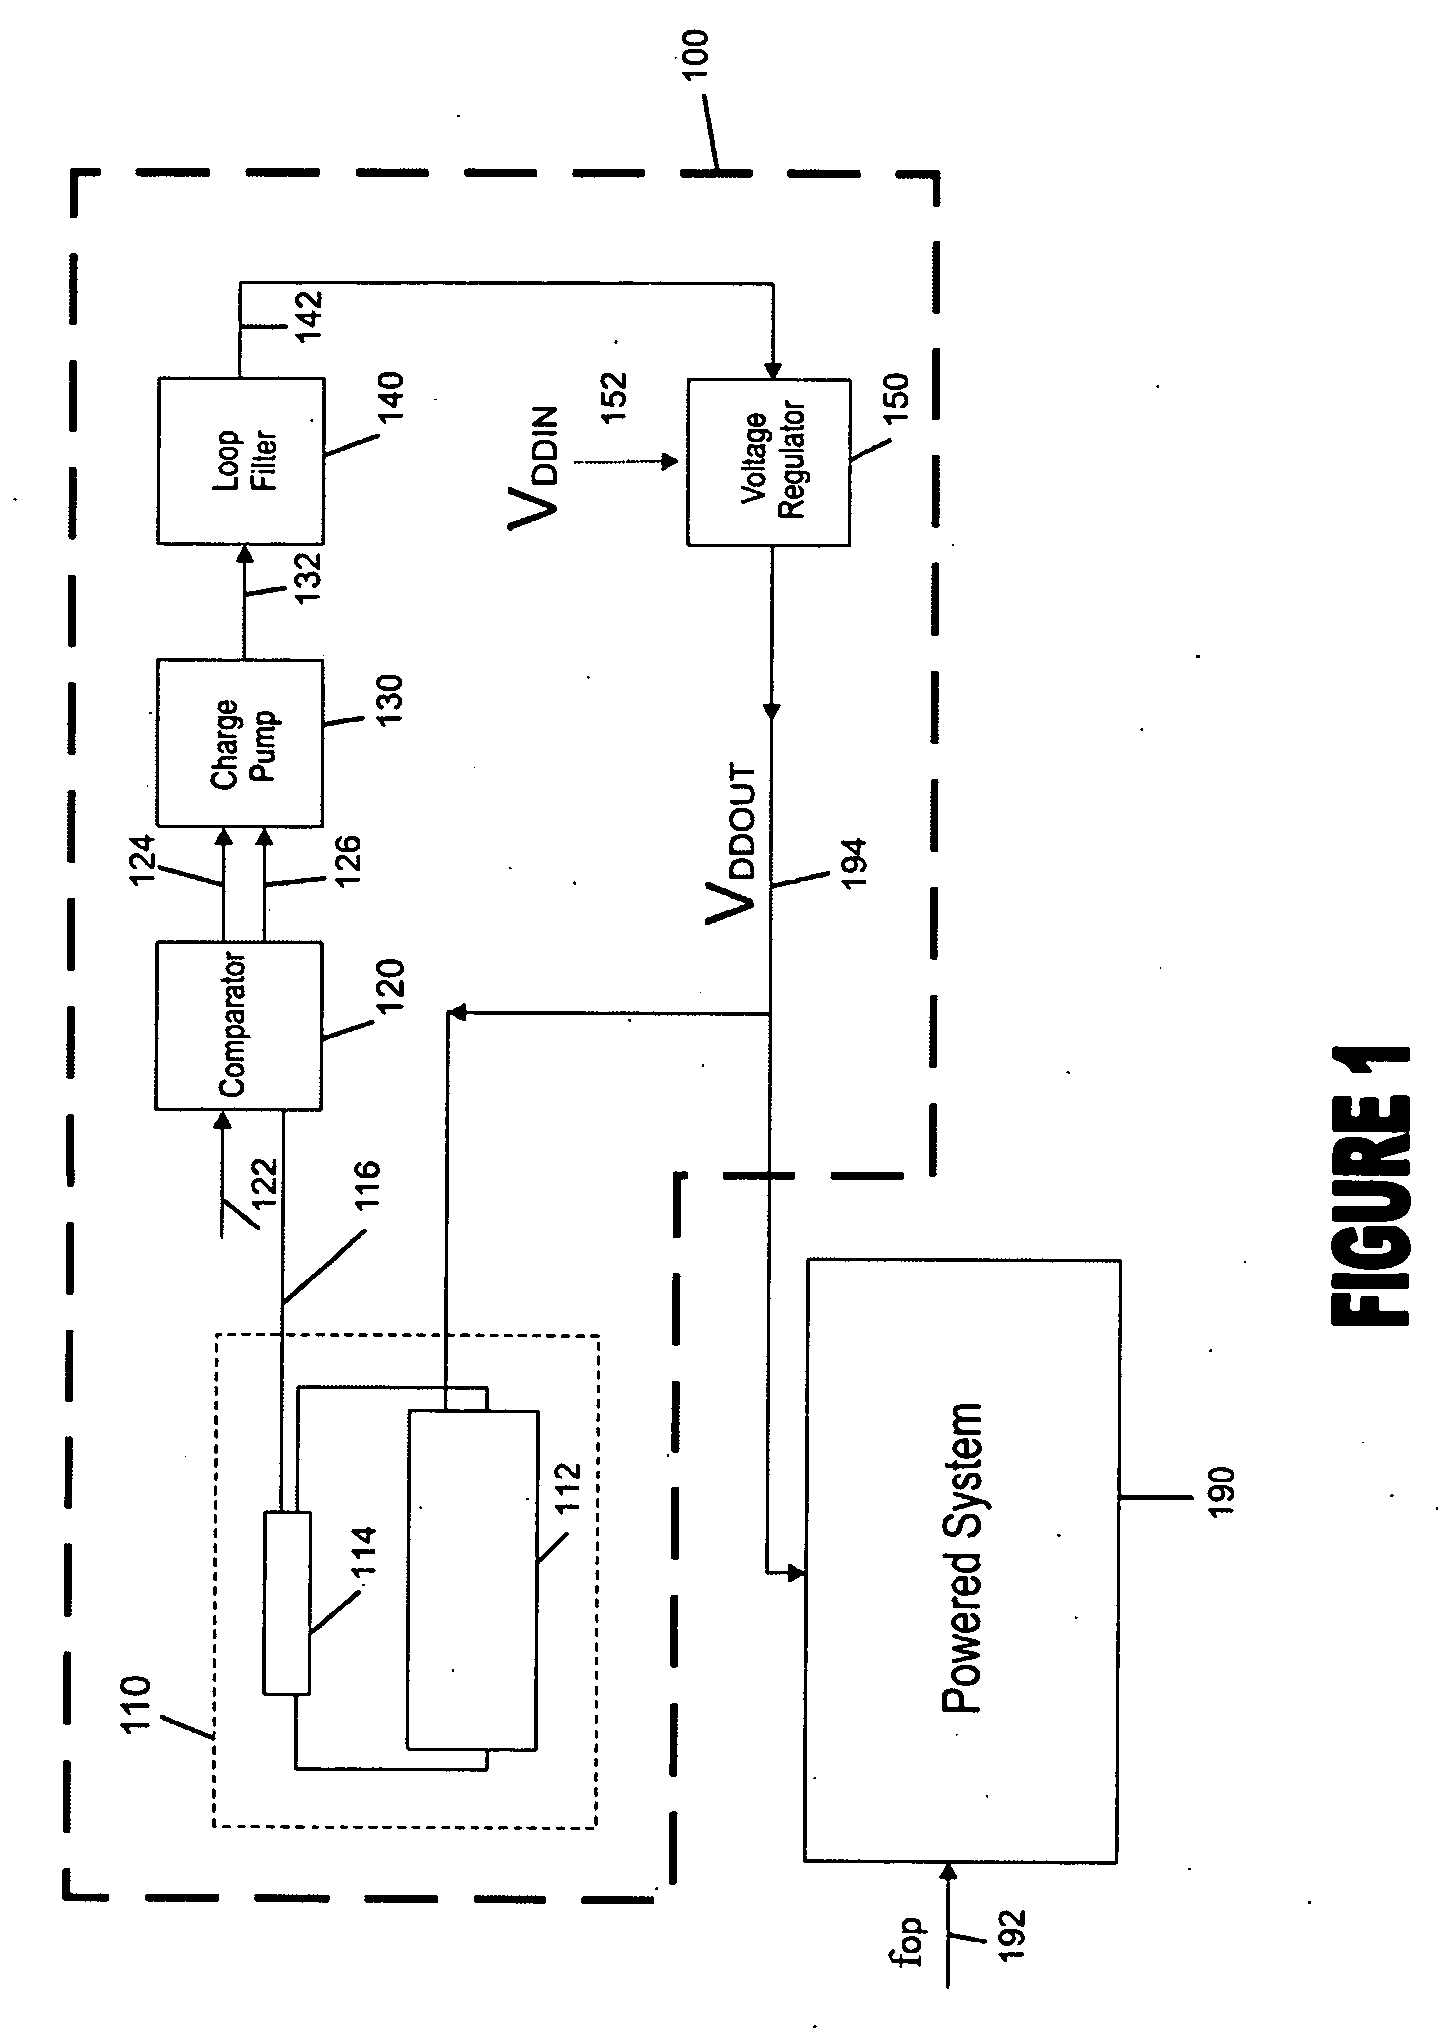 System and method for adaptive power supply to reduce power consumption